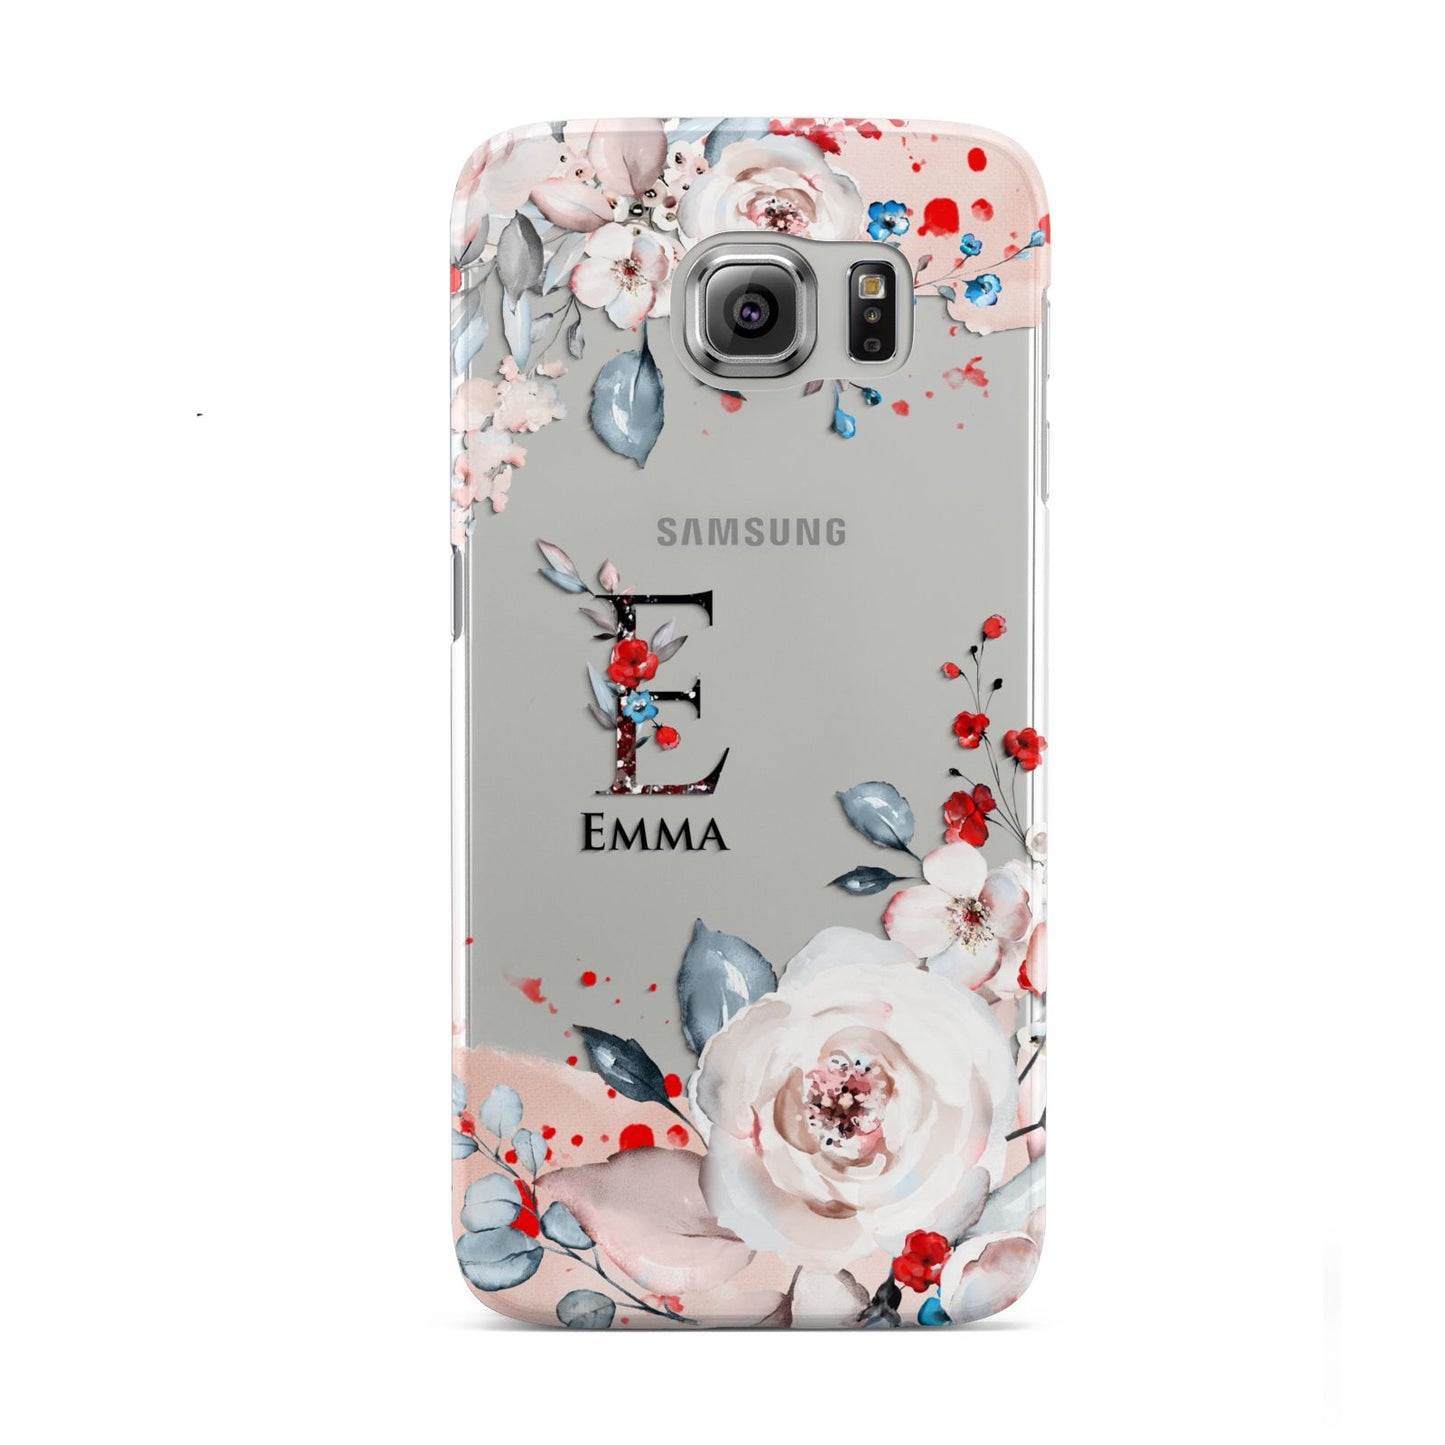 Monogrammed Roses Floral Wreath Samsung Galaxy S6 Case